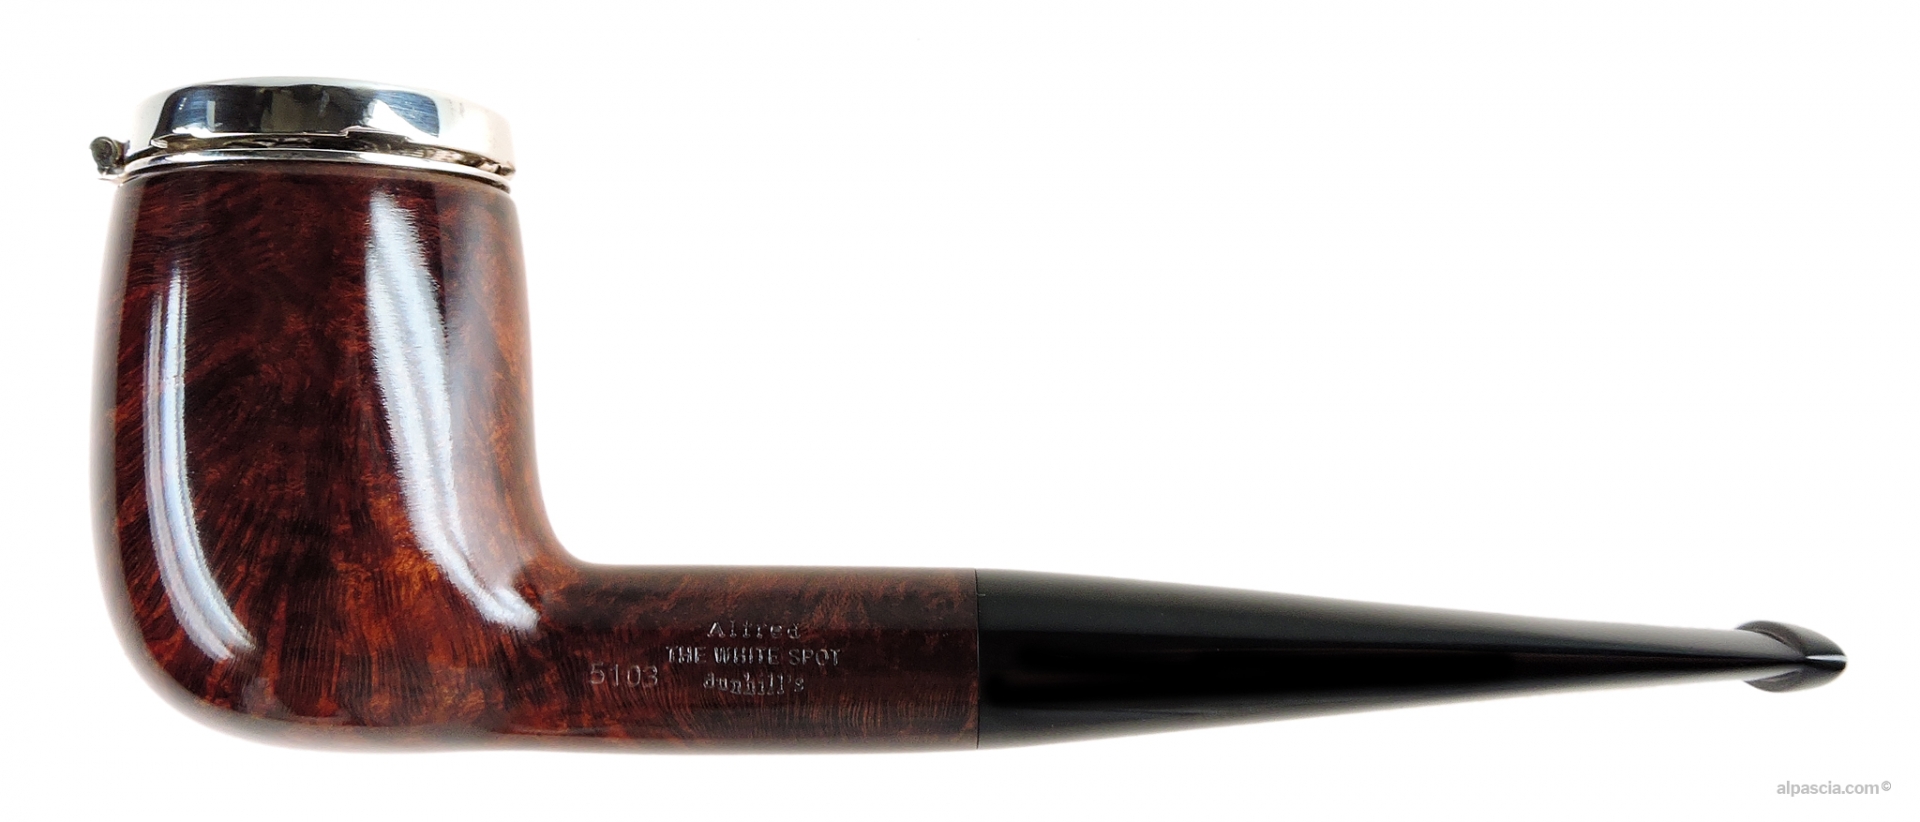 GALLERY_DETAIL_1600092750_Dunhill-pipe-D388A.jpg